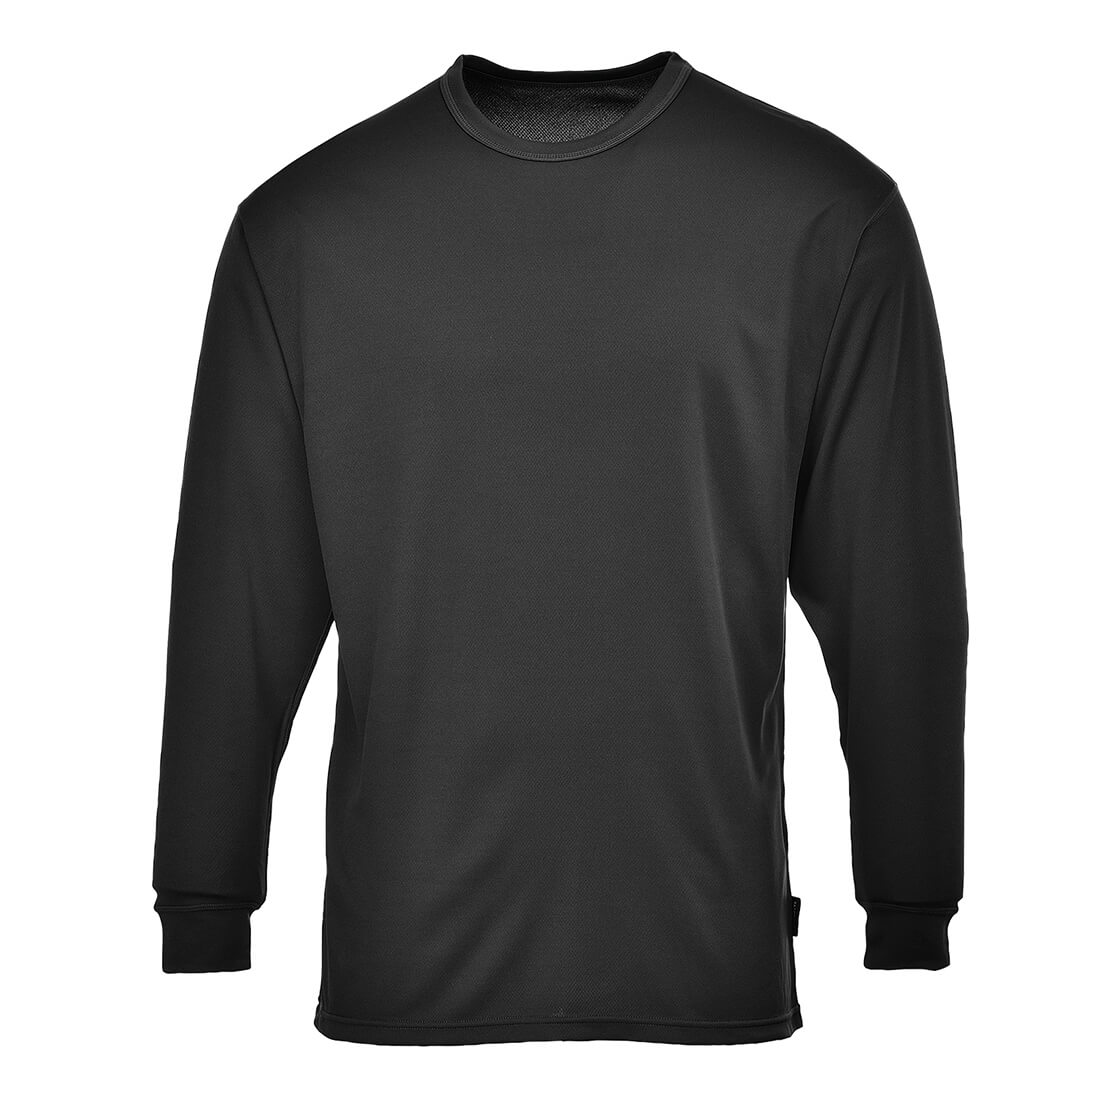 Image of Base Layer Thermal Top Long Sleeve Black L